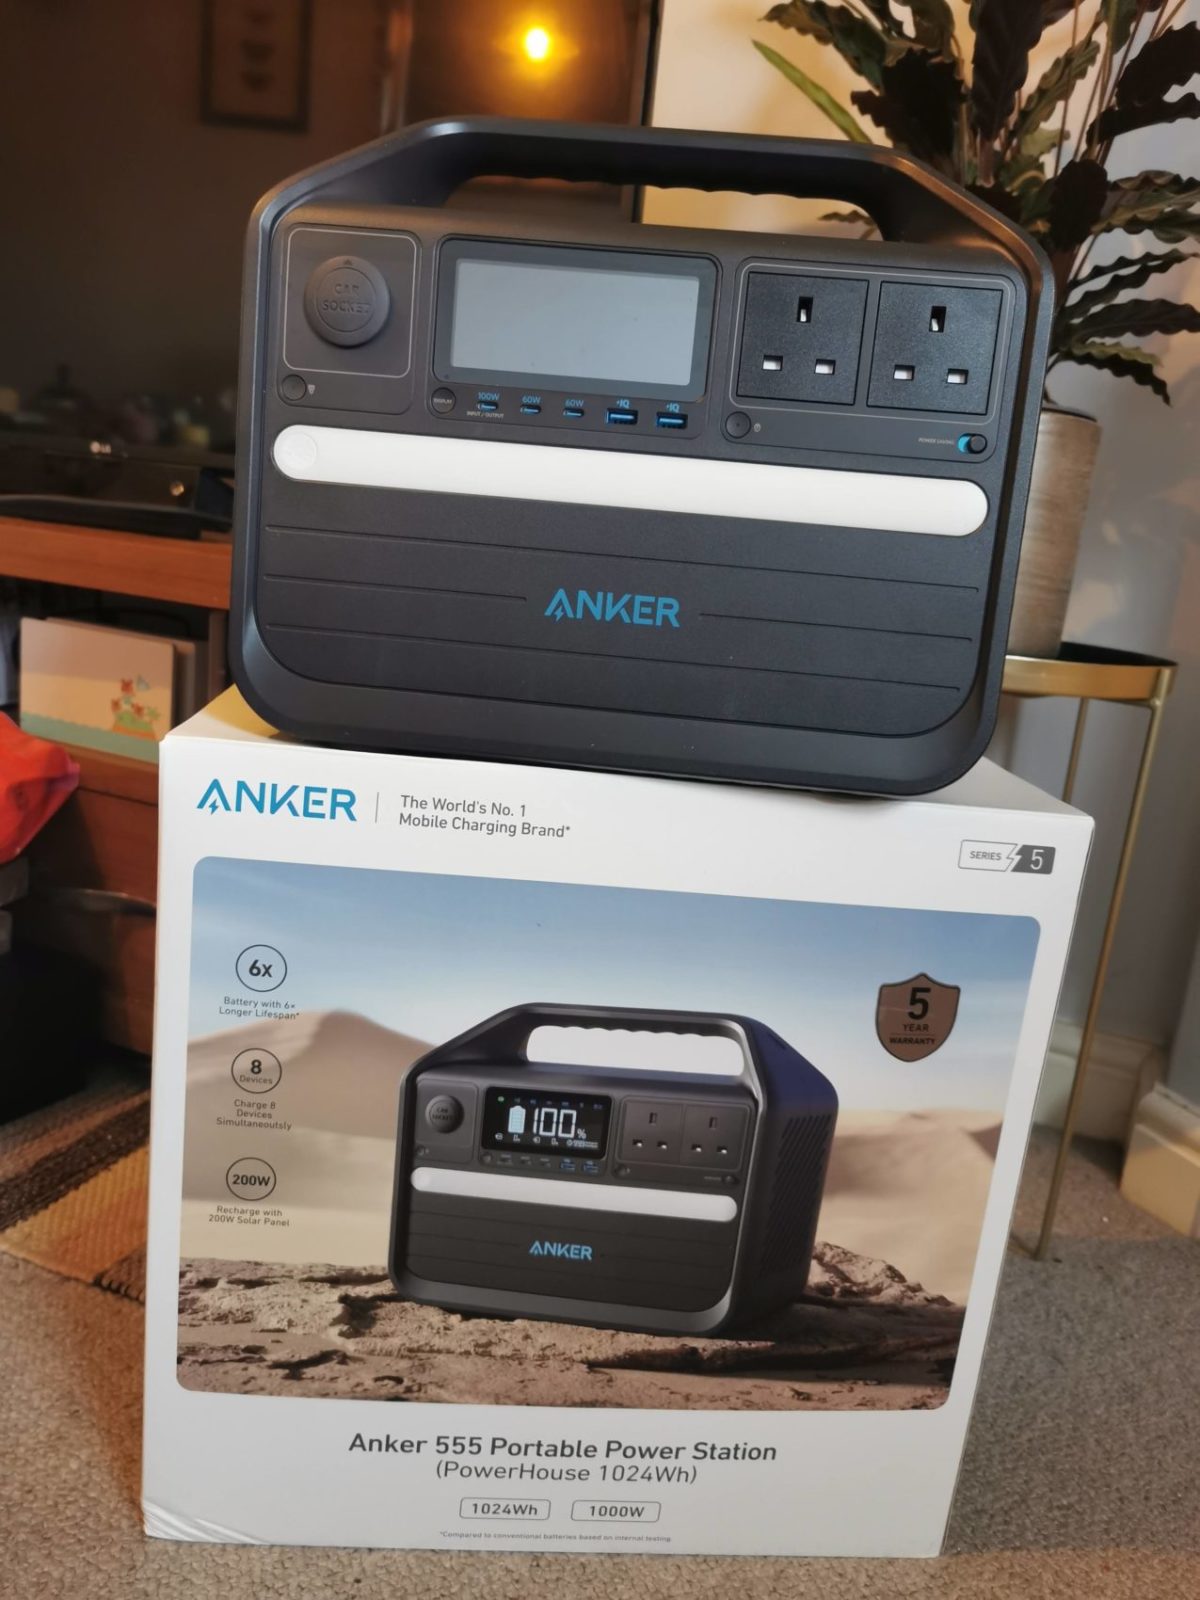 Anker 555 Portable Power Station Review